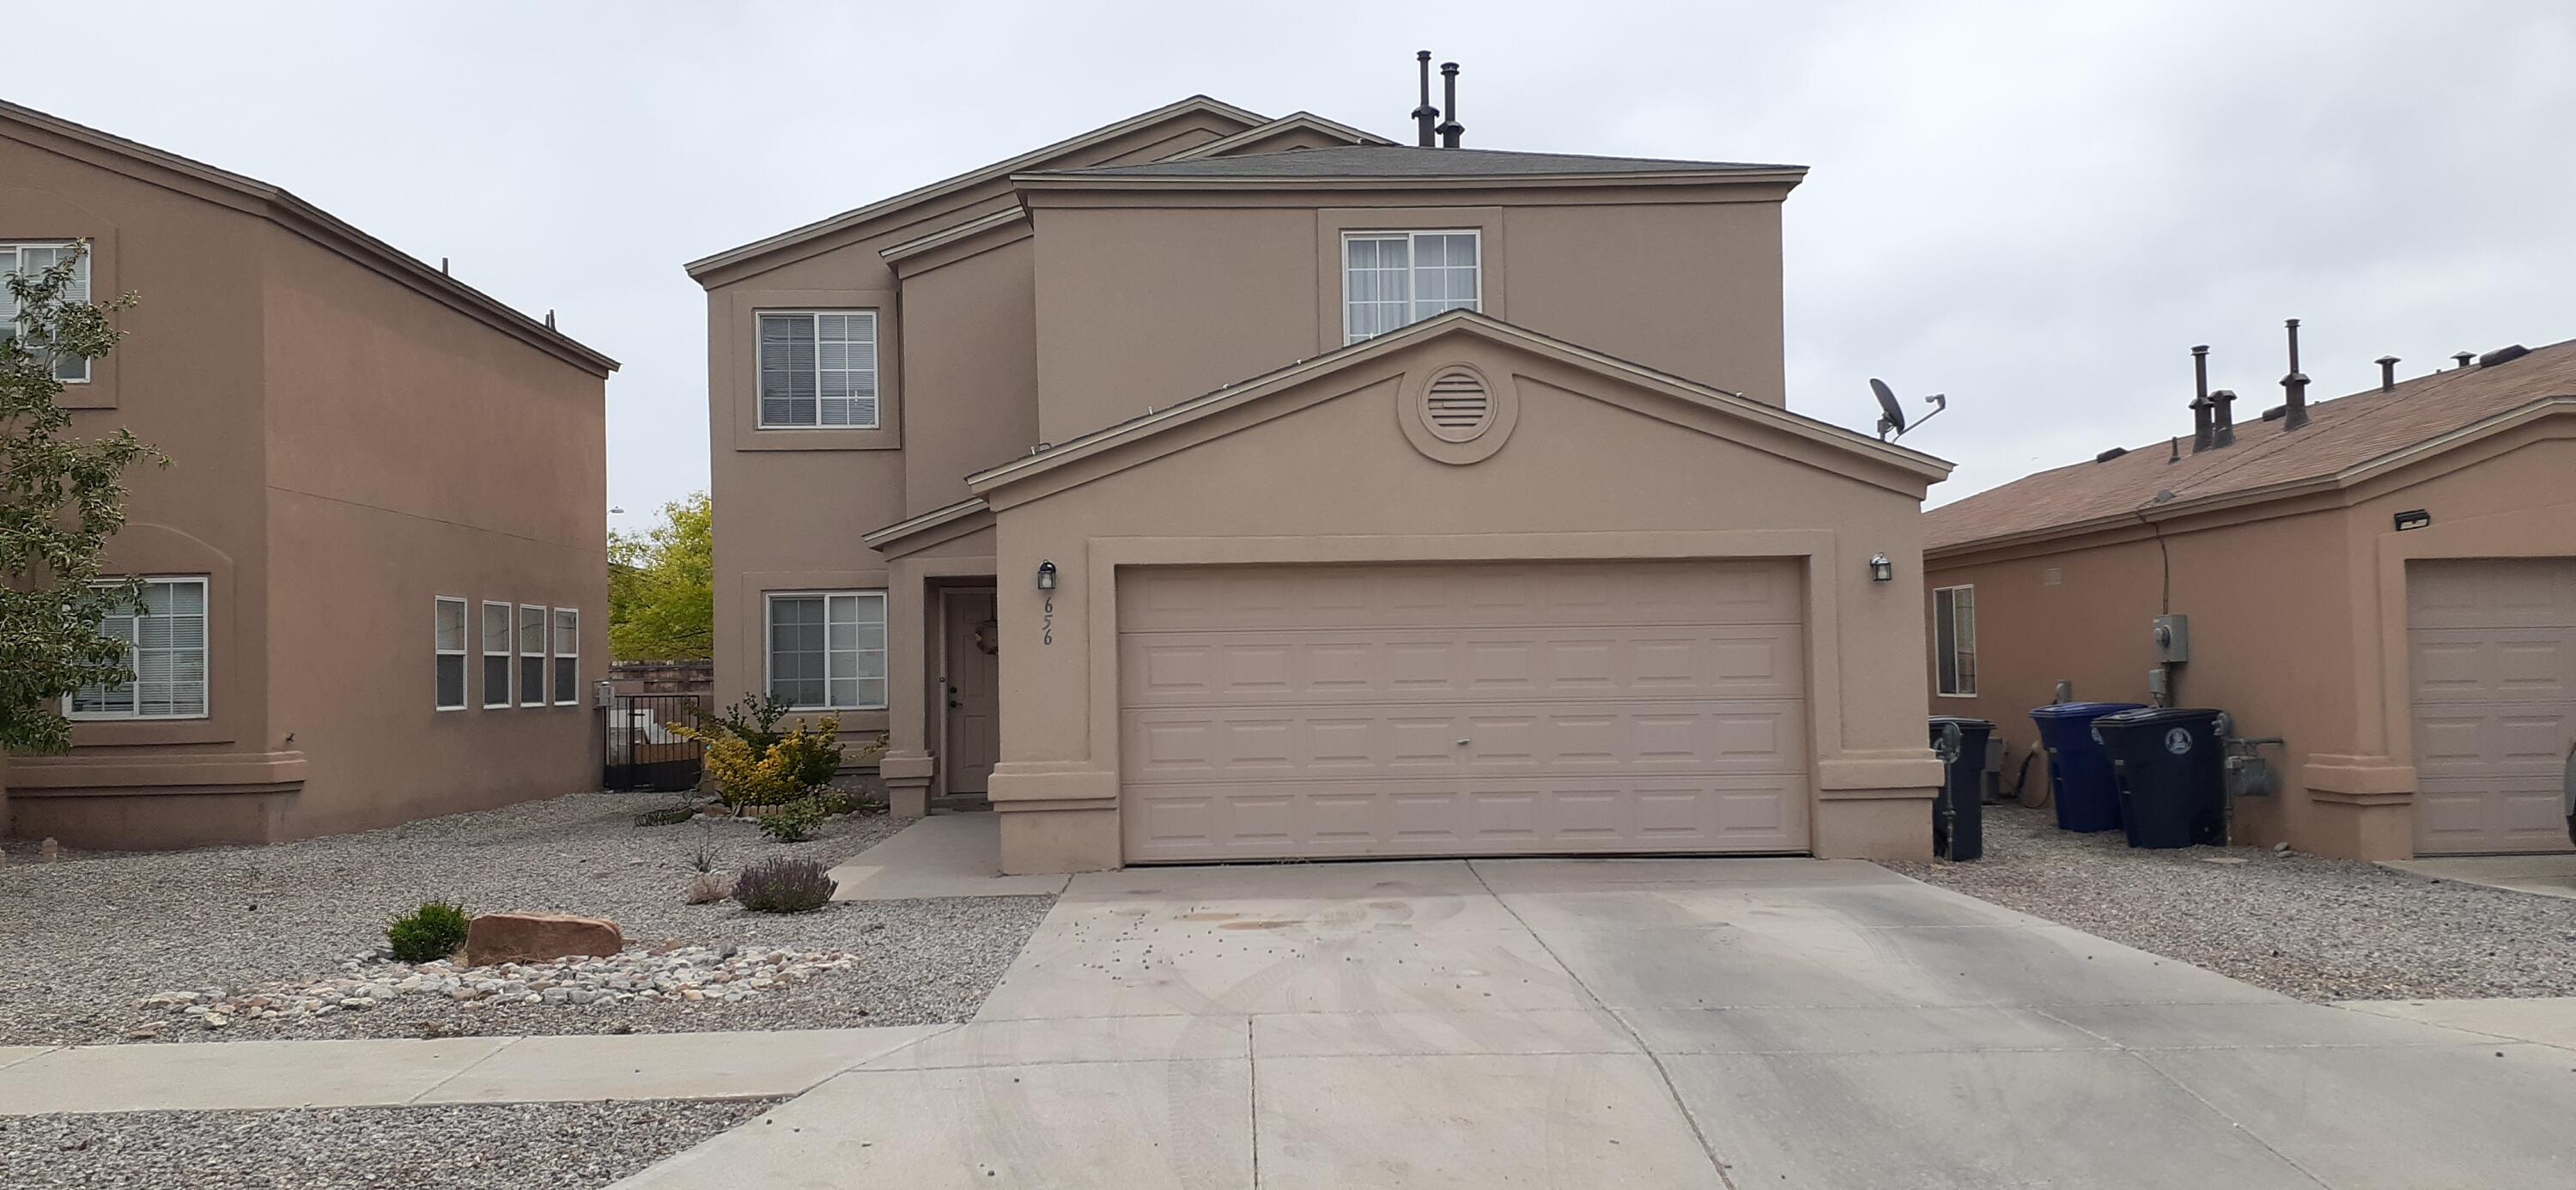 Security of a Gated Community: Fire Place, Loft, 3 Good size rooms. 2 full bath's up stairs, Guest bathroom down stairs. Full open floor plan kitchen and living room.